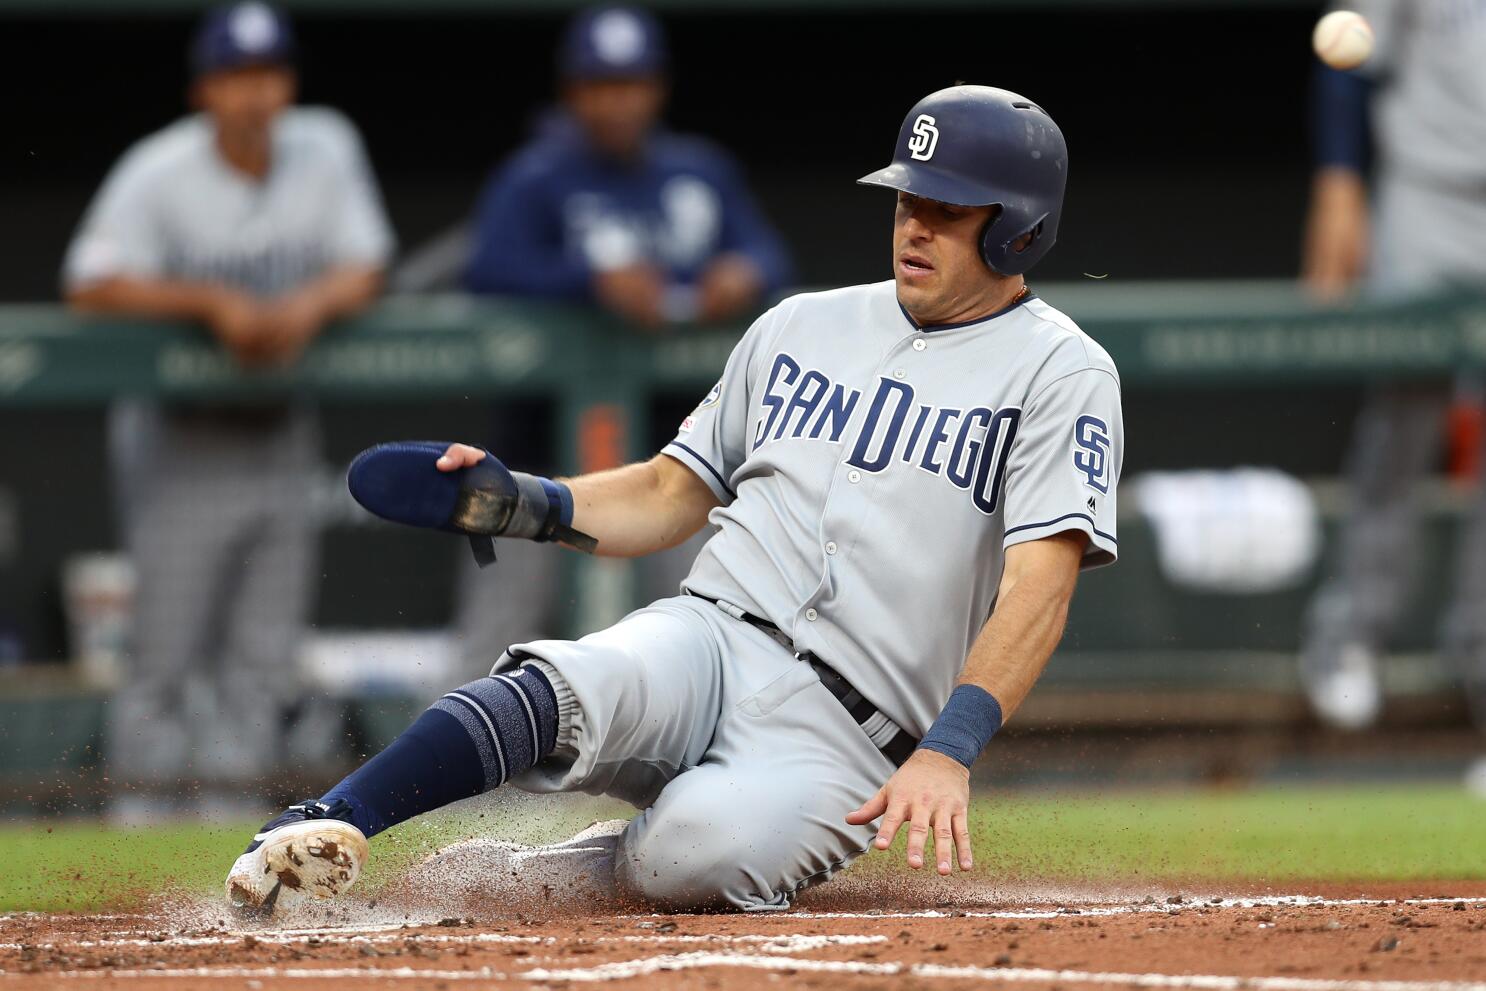 Kinsler settles in; Urias still likely to be Padres' second baseman soon -  The San Diego Union-Tribune